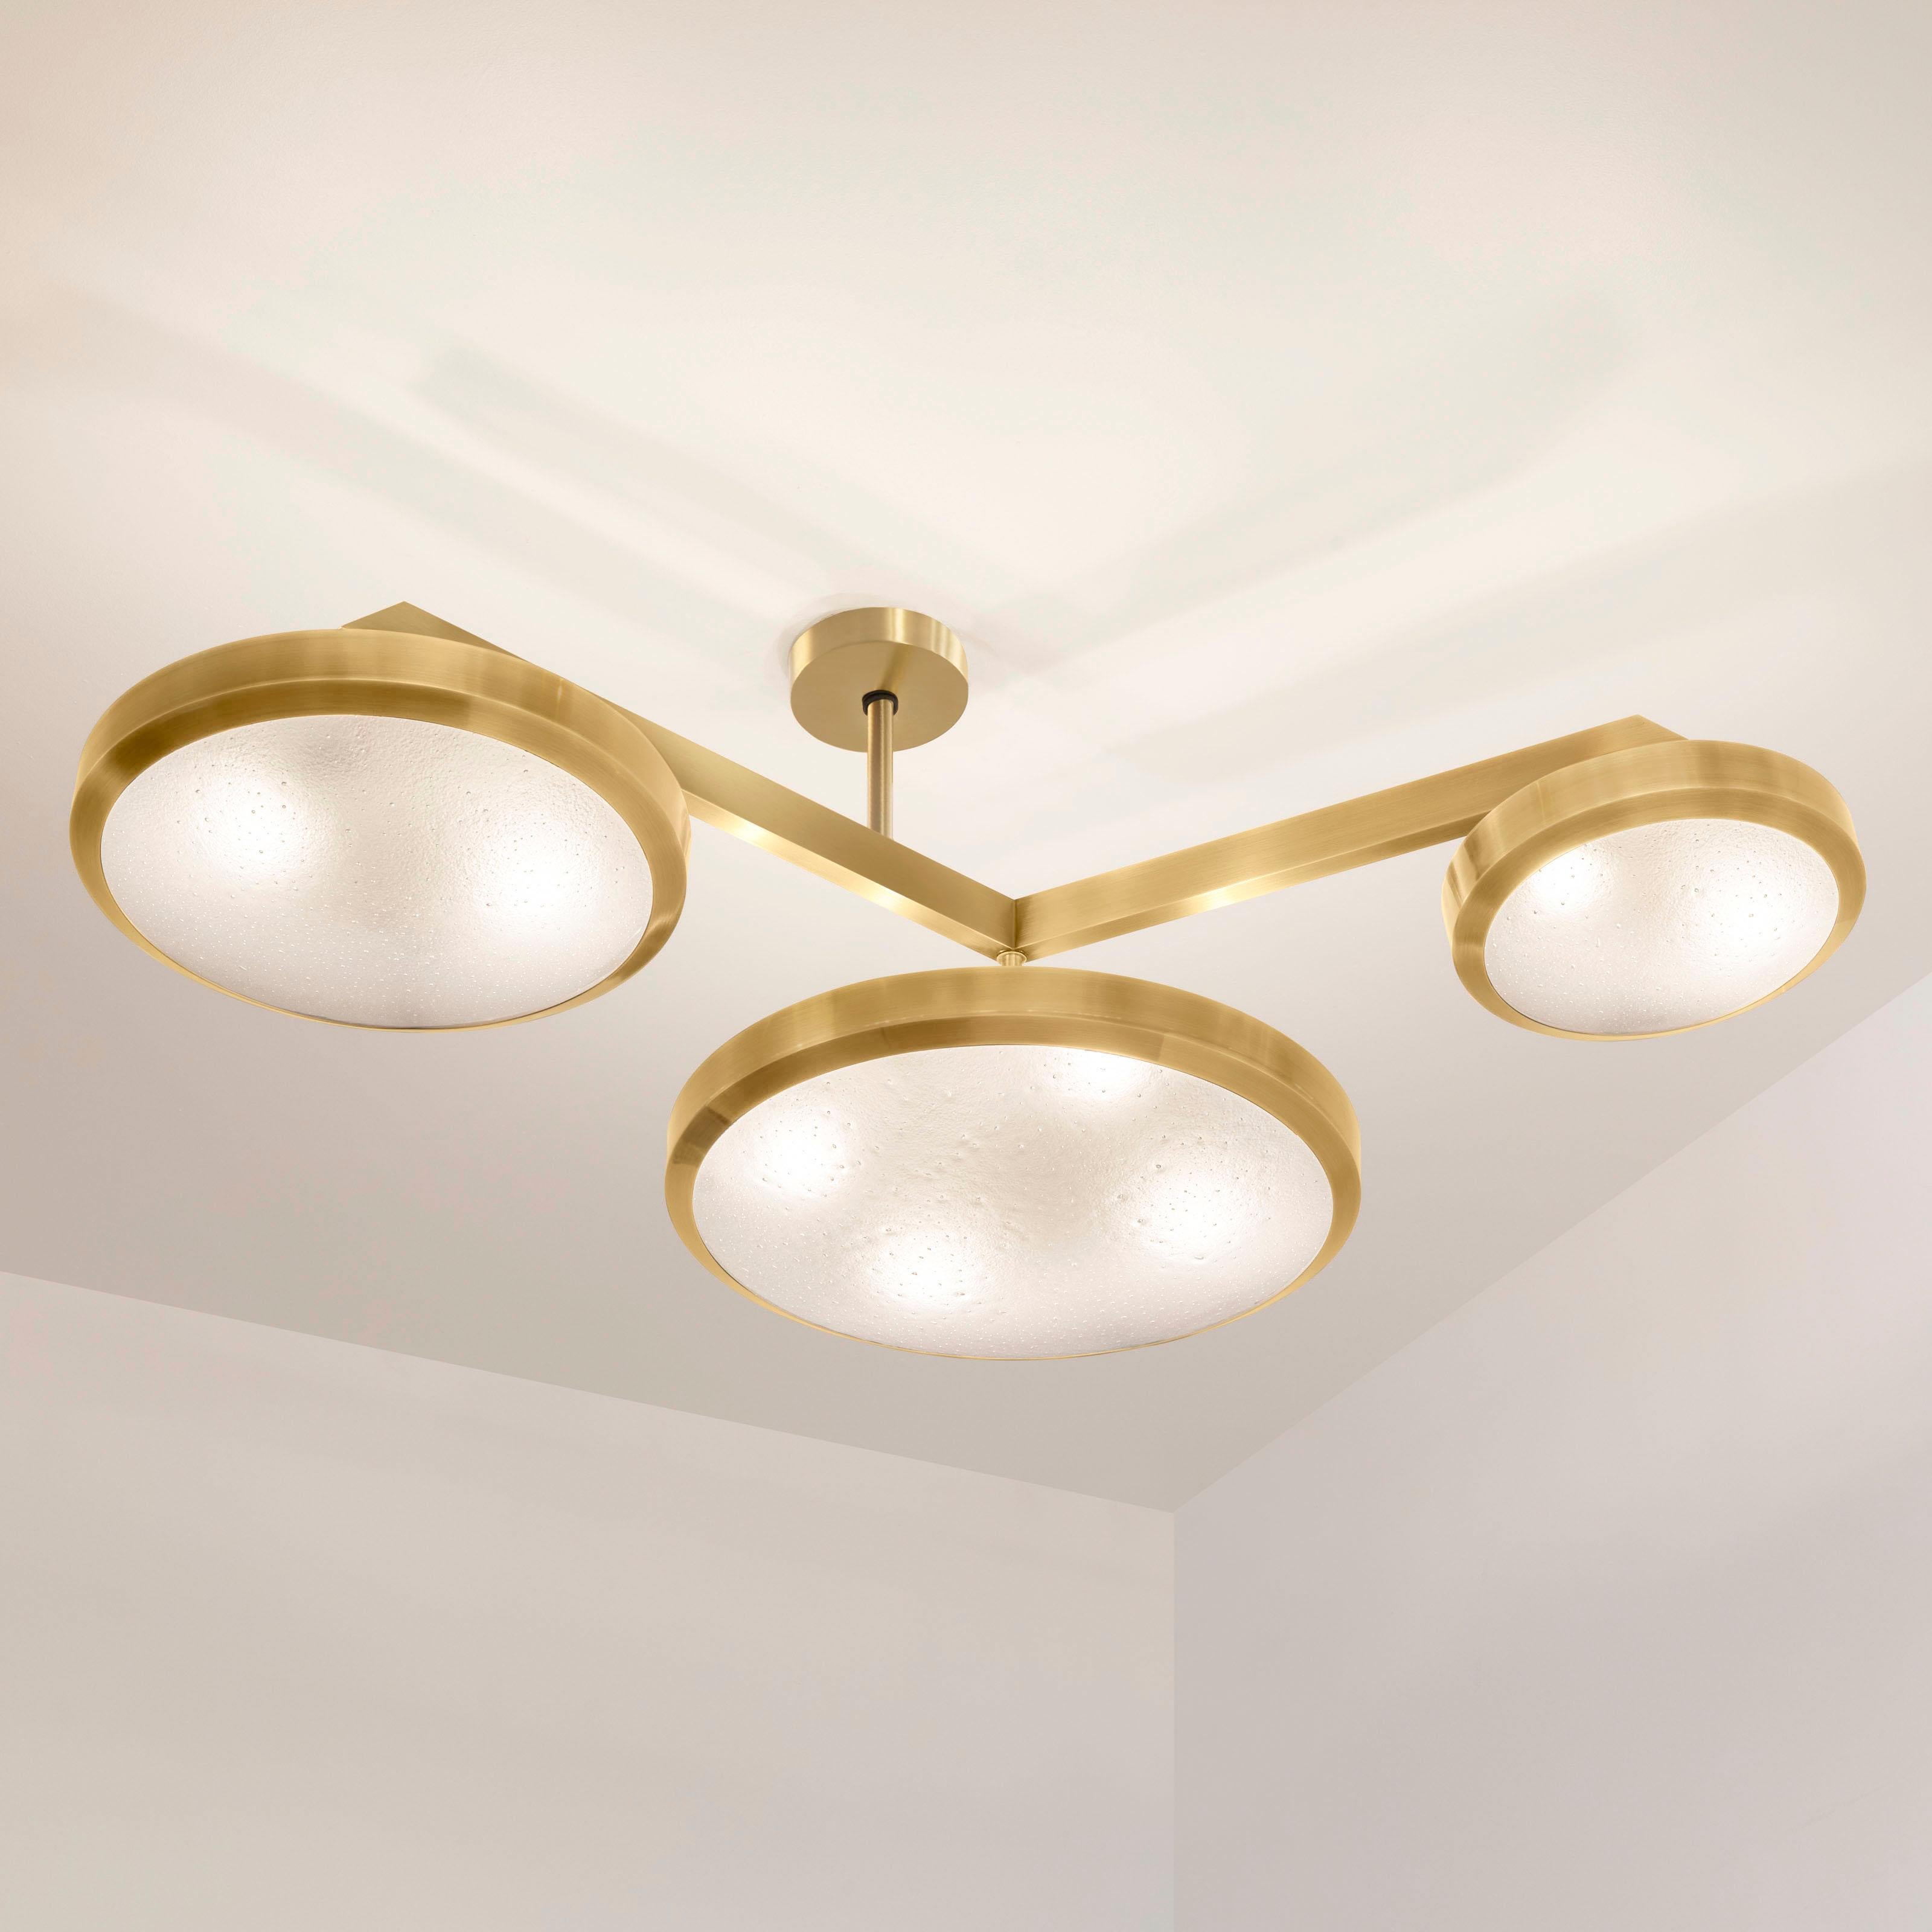 Italian Zeta Ceiling Light by Gaspare Asaro - Polished Nickel Finish For Sale